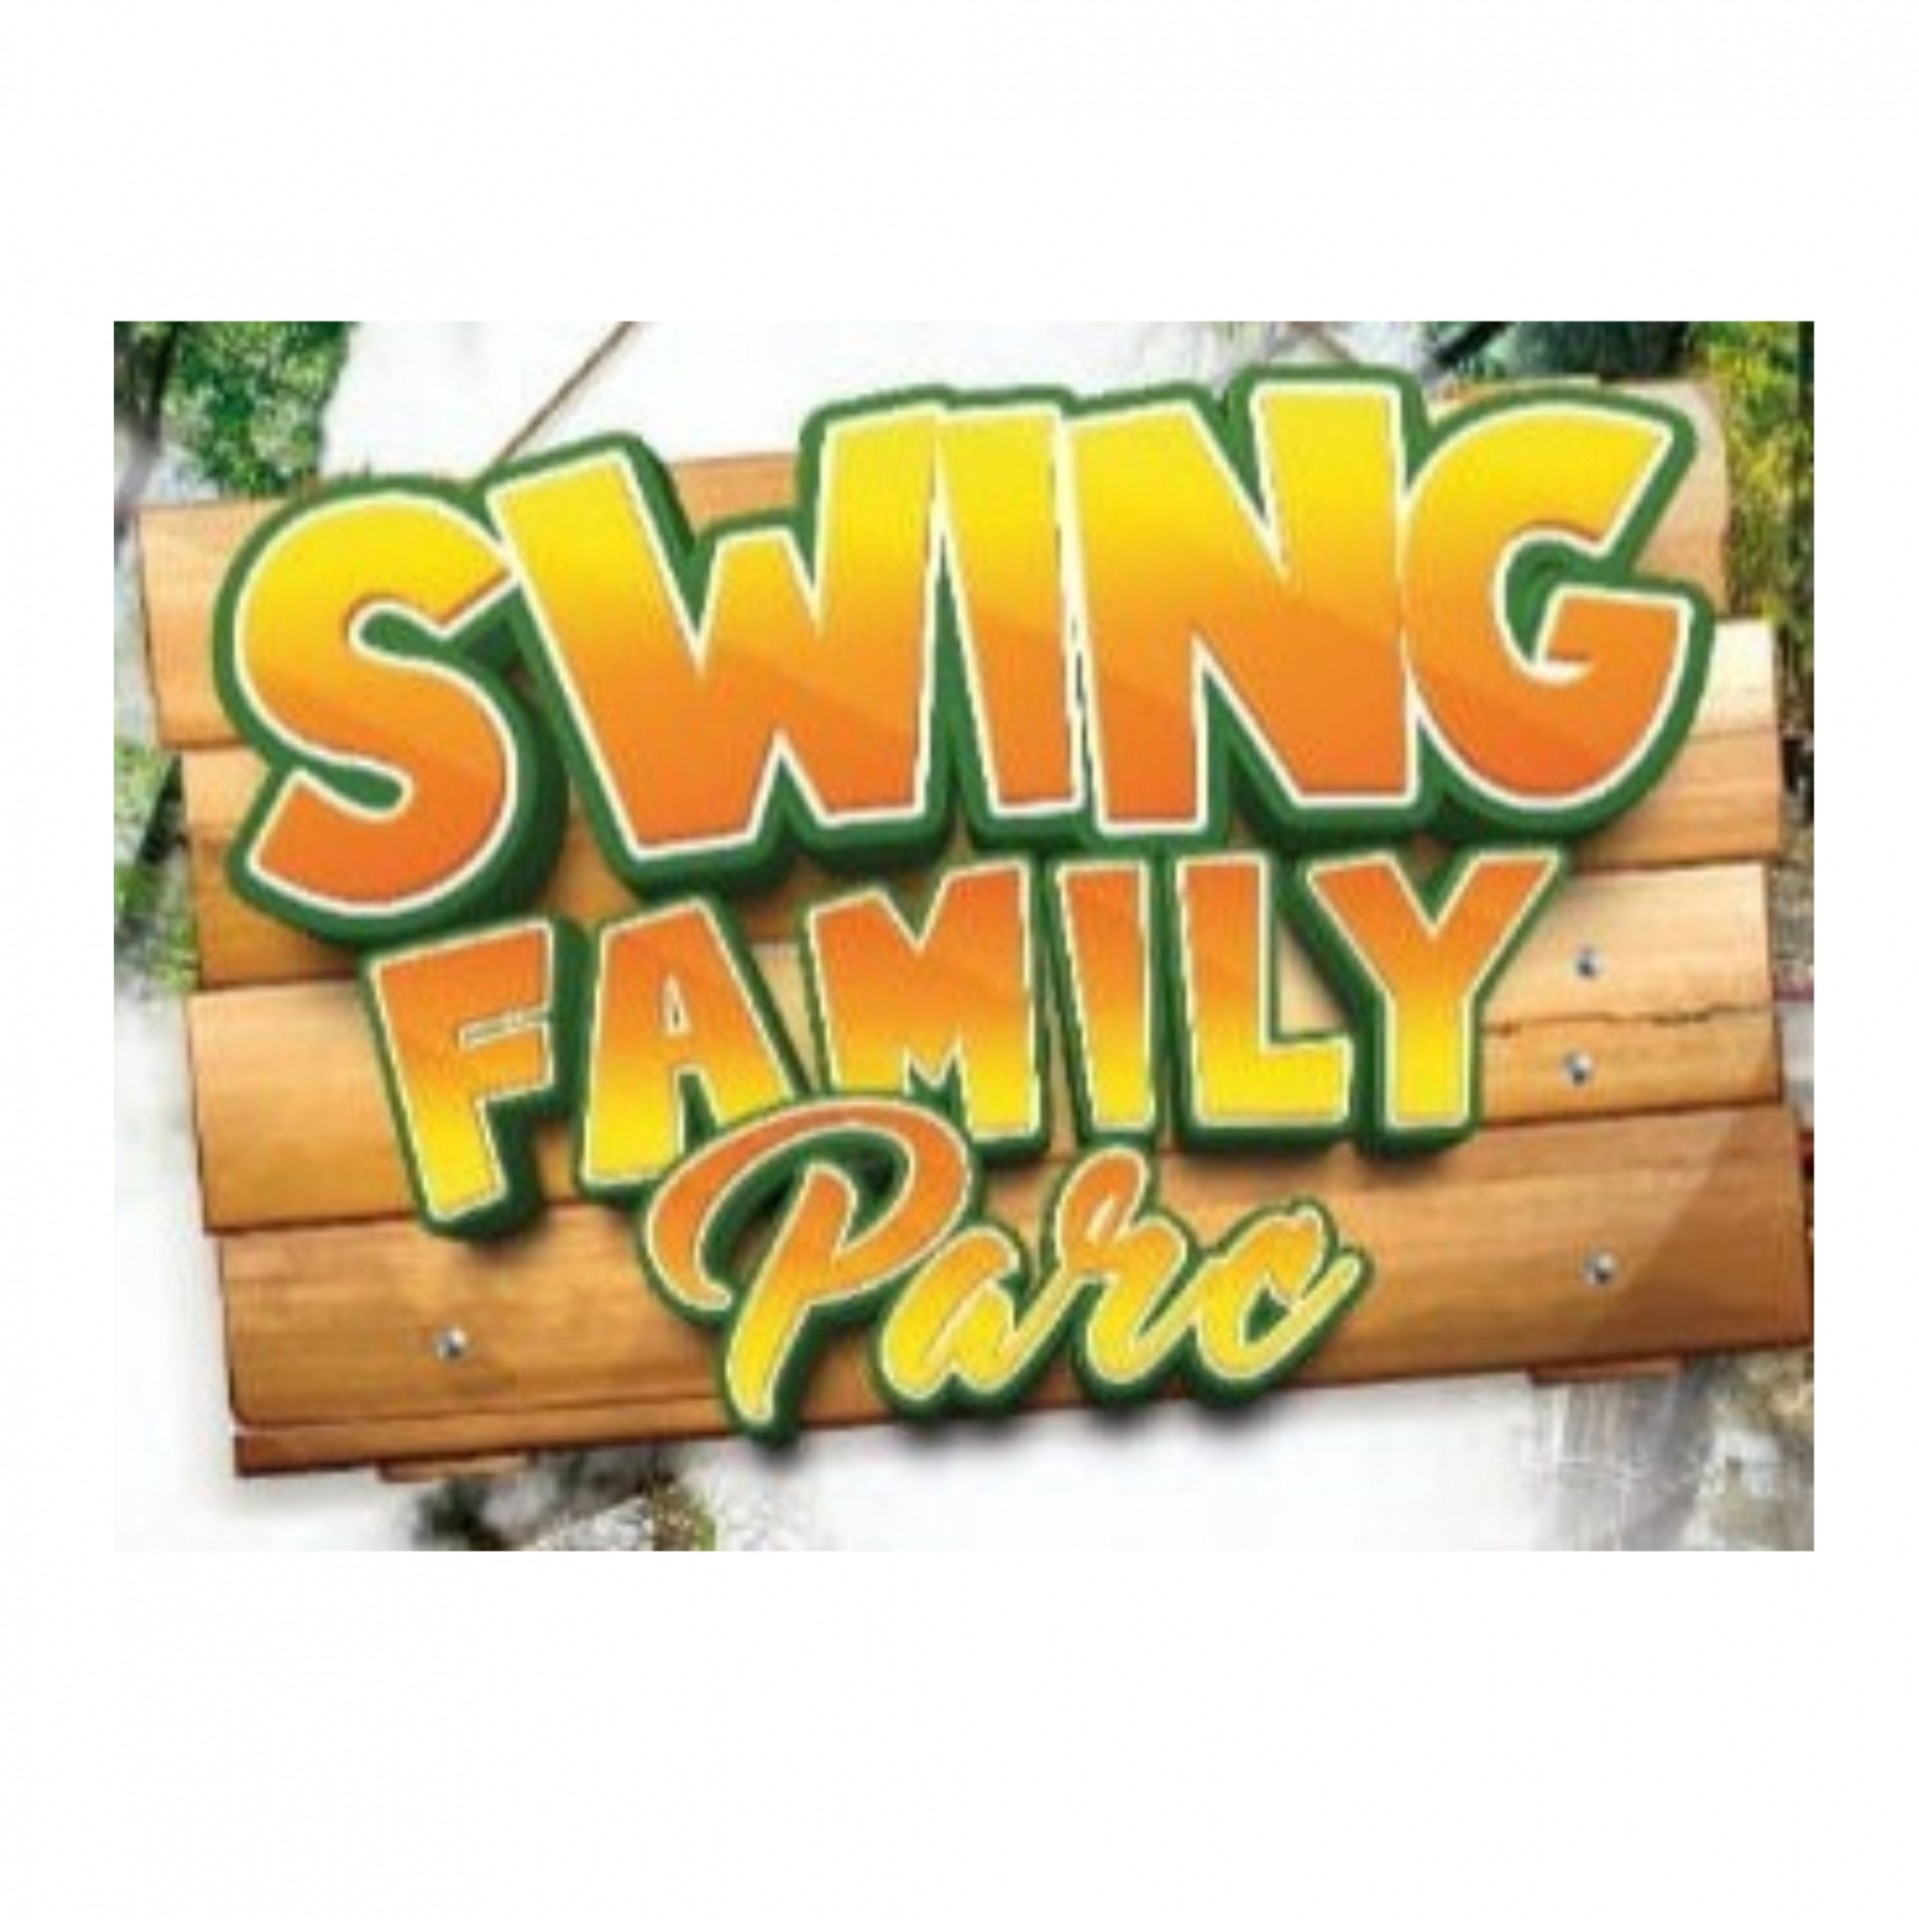 SWING FAMILY  PARC